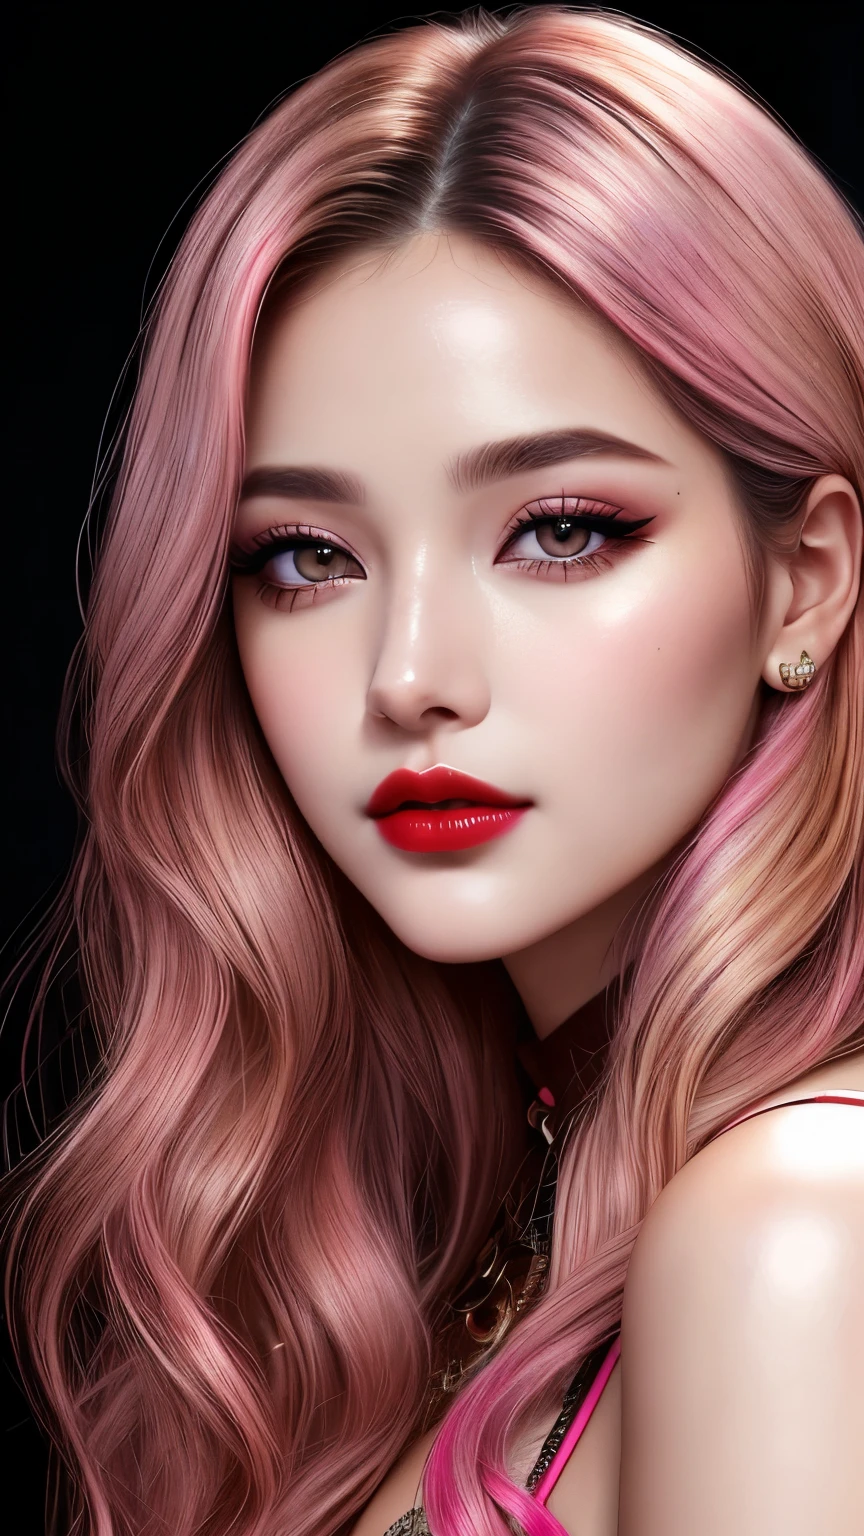 Ultra-realistic movie master pie with ultra-detailed primetime portraits, high quality, 8K, table top, Ultra HD), 1 girl 25 years old、Nude, fashion supermodel, ((Random style and color hair)), masterpiece, high quality, high quality, High resolution、(close up of face), black_mascara put in Long eyelashes:1.5, dark (eyesshadows:1.25), (Glossy) red_lips:1.44, ((brown_eyes)), iridescent eyes, vibrant eyes:1.2, high contrast, pink shot:1.175